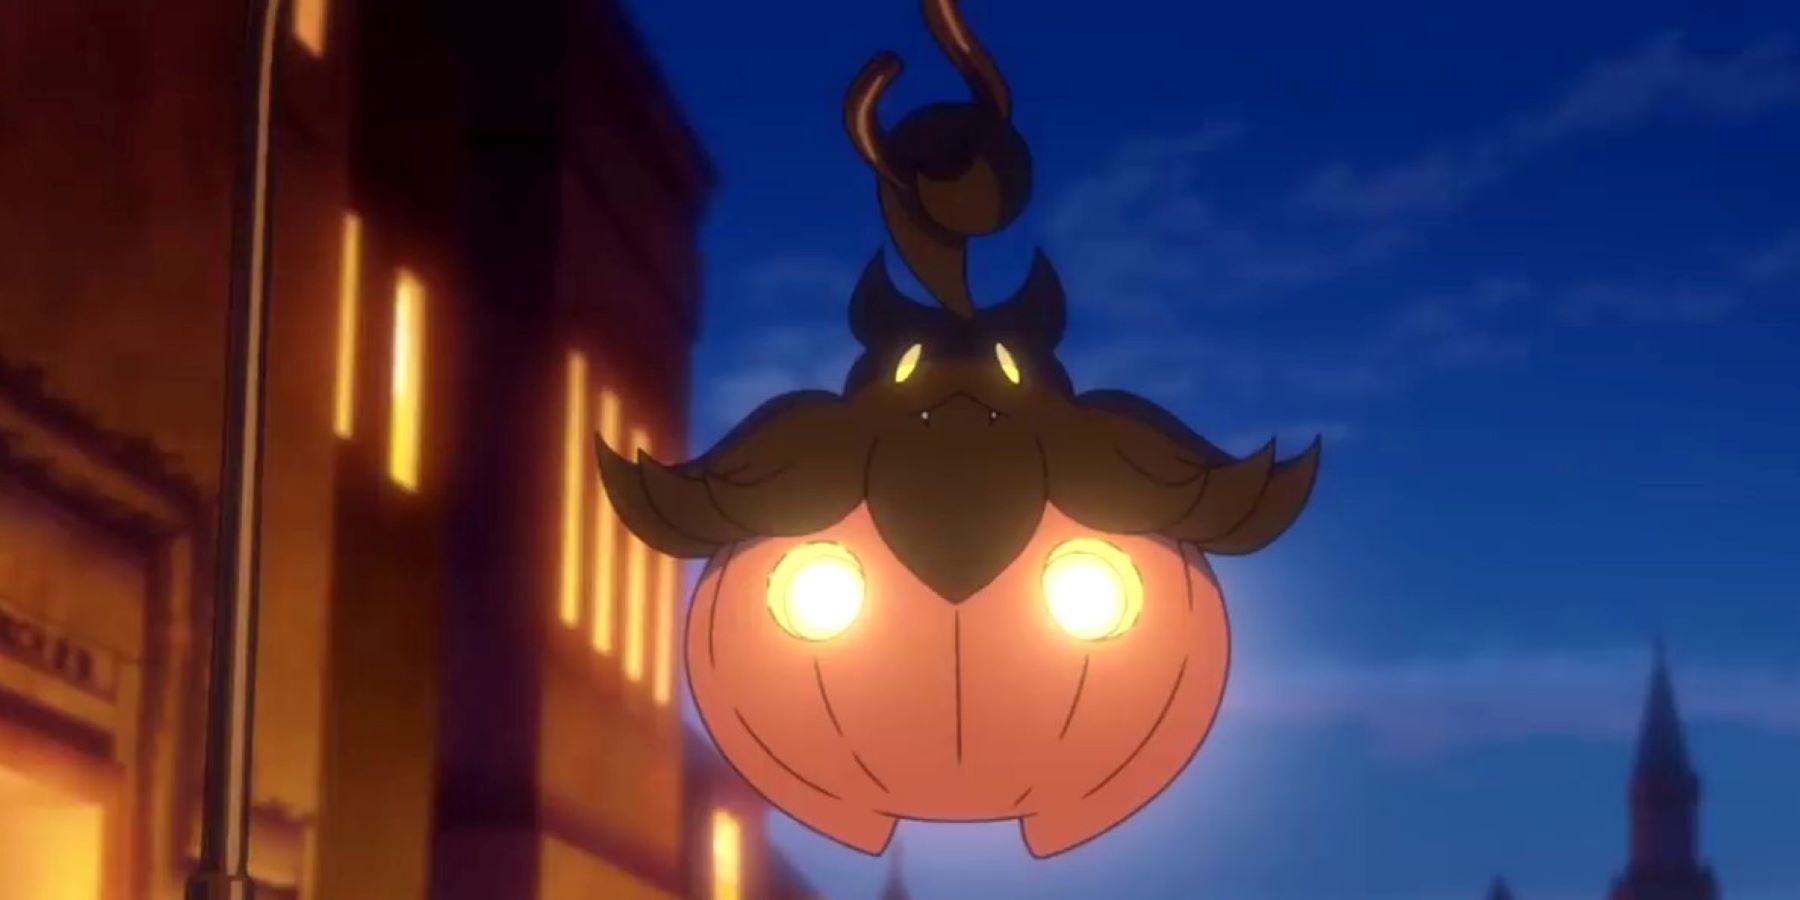 A Pumpkaboo hanging from a hook like a lantern in the Pokemon: Twilight Wings anime